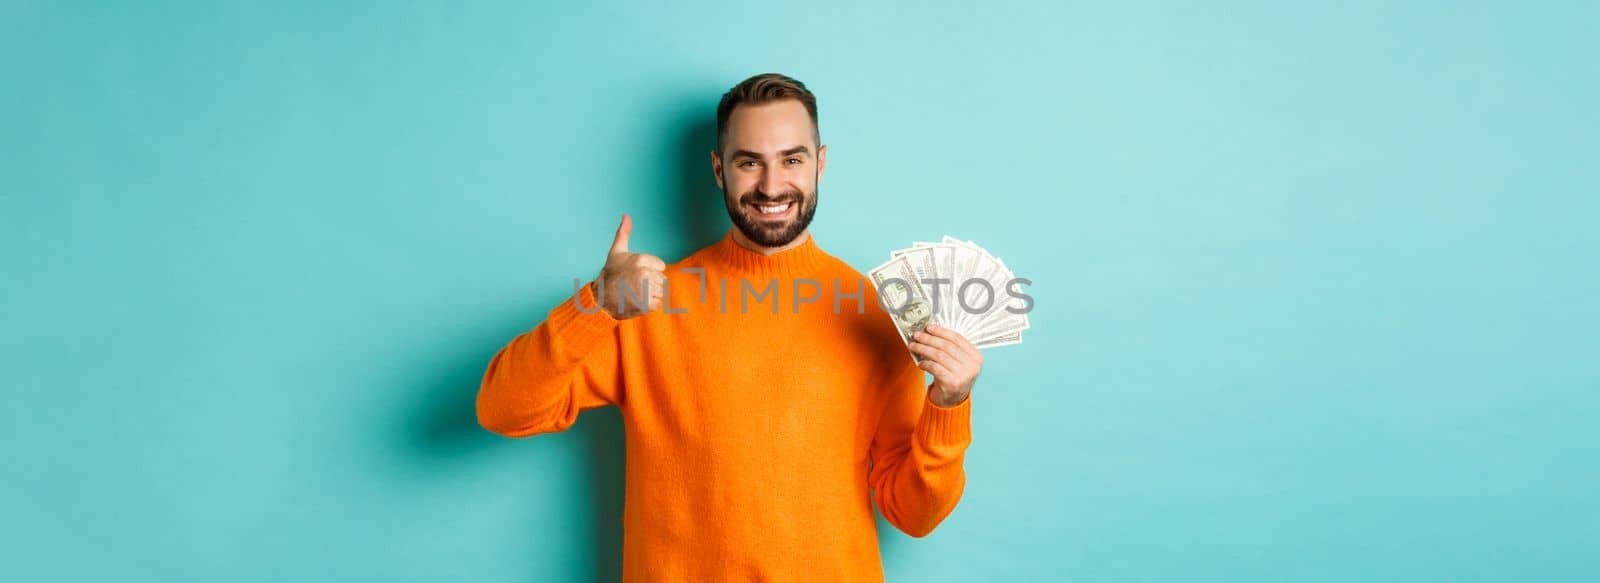 Shopping. Happy man showing thumb up and money in dollars, recommending bank loan or credits, standing over light blue background.